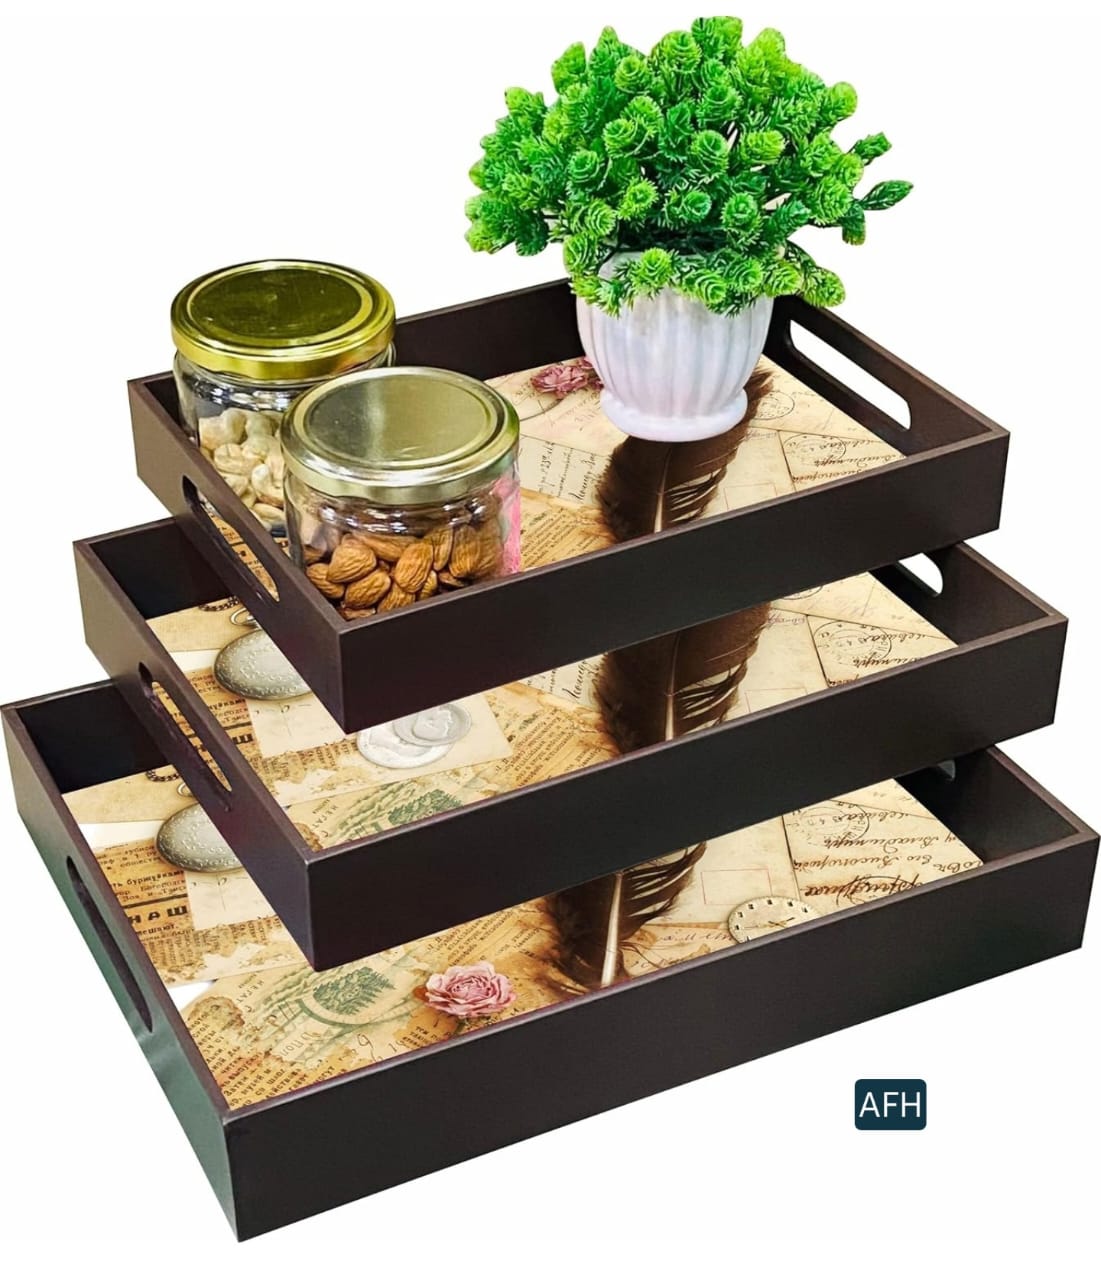 Designer Tray | Wooden Serving Tray | Latest Serving Tray (Set of 3)